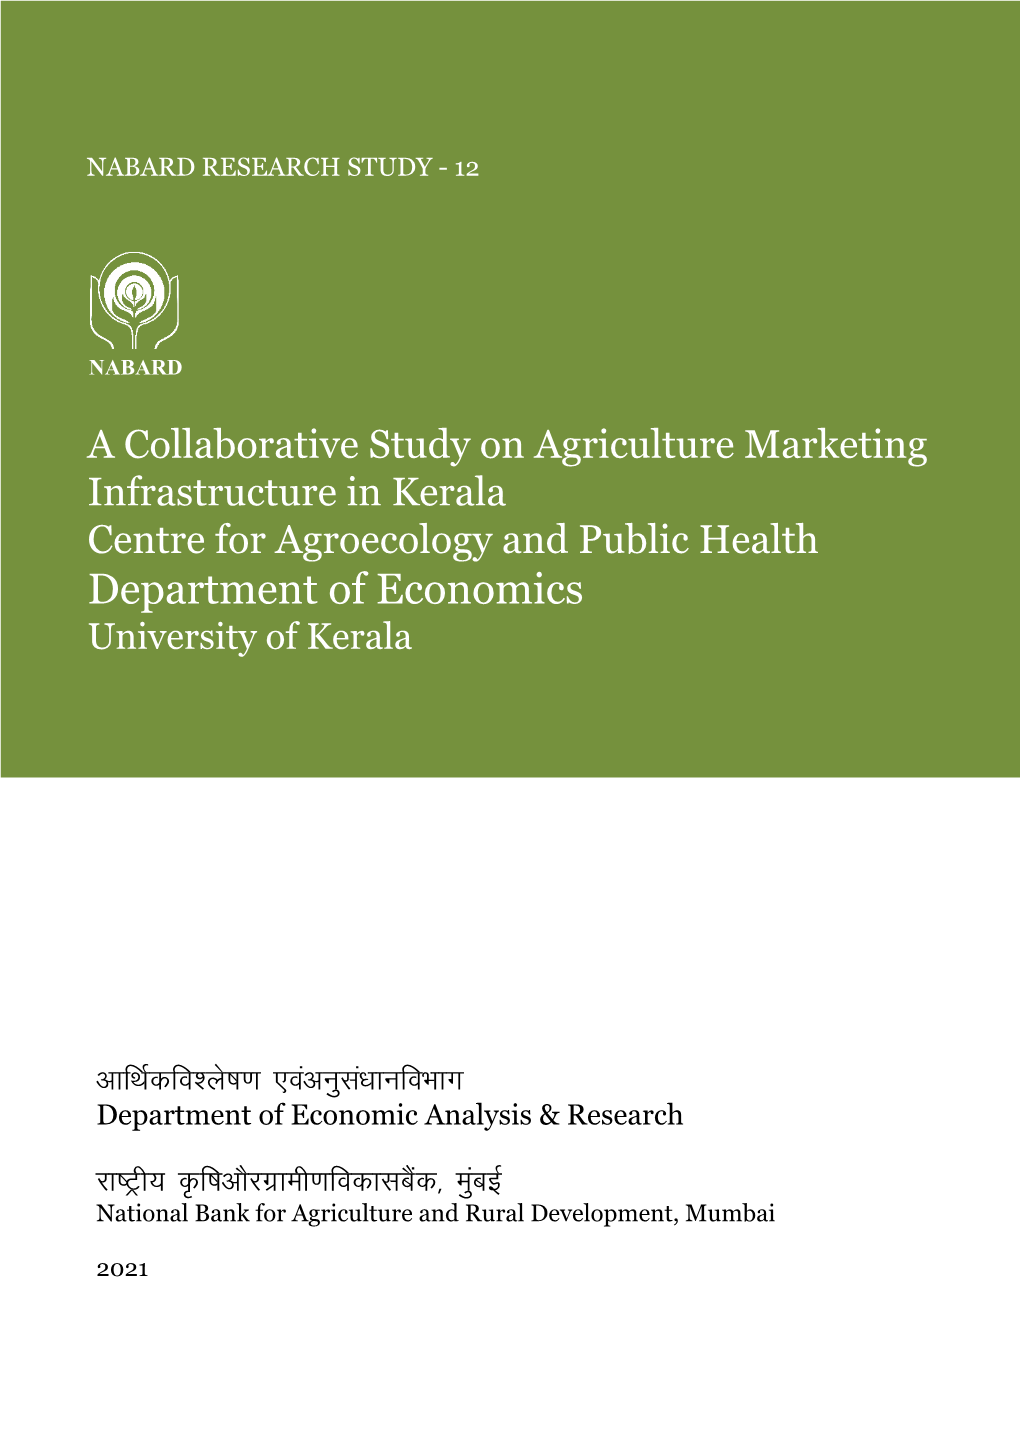 A Collaborative Study on Agriculture Marketing Infrastructure in Kerala Centre for Agroecology and Public Health Department of Economics University of Kerala